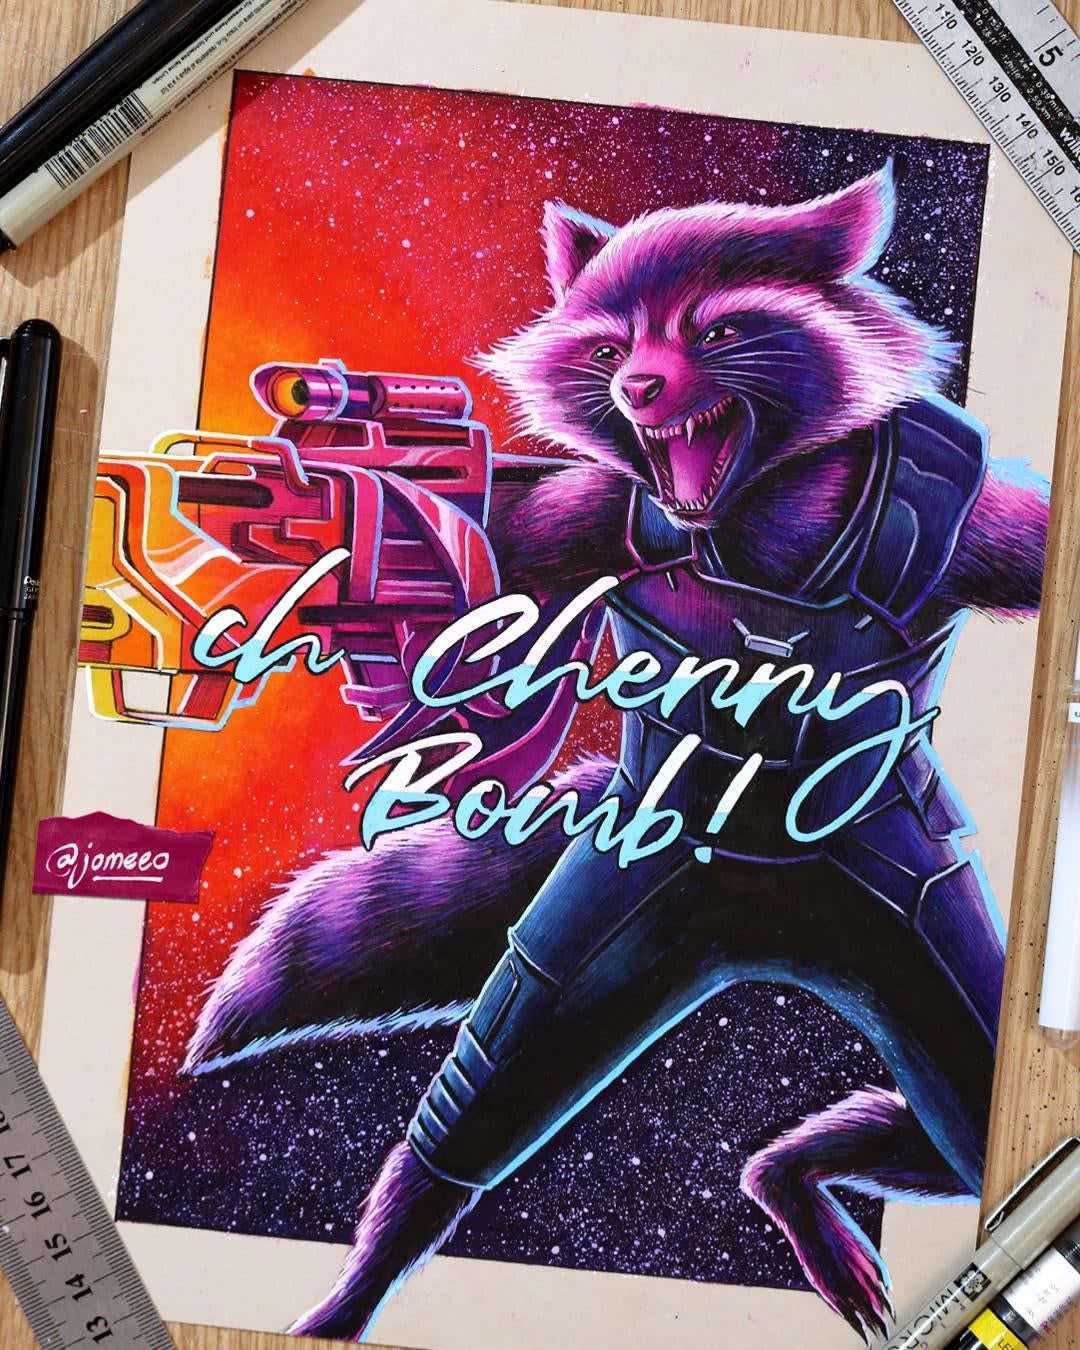 Recently shared a Synthwave inspired Star-Lord piece, which in turn inspired this Synthwave style Rocket Raccoon piece! (@jomeeo)